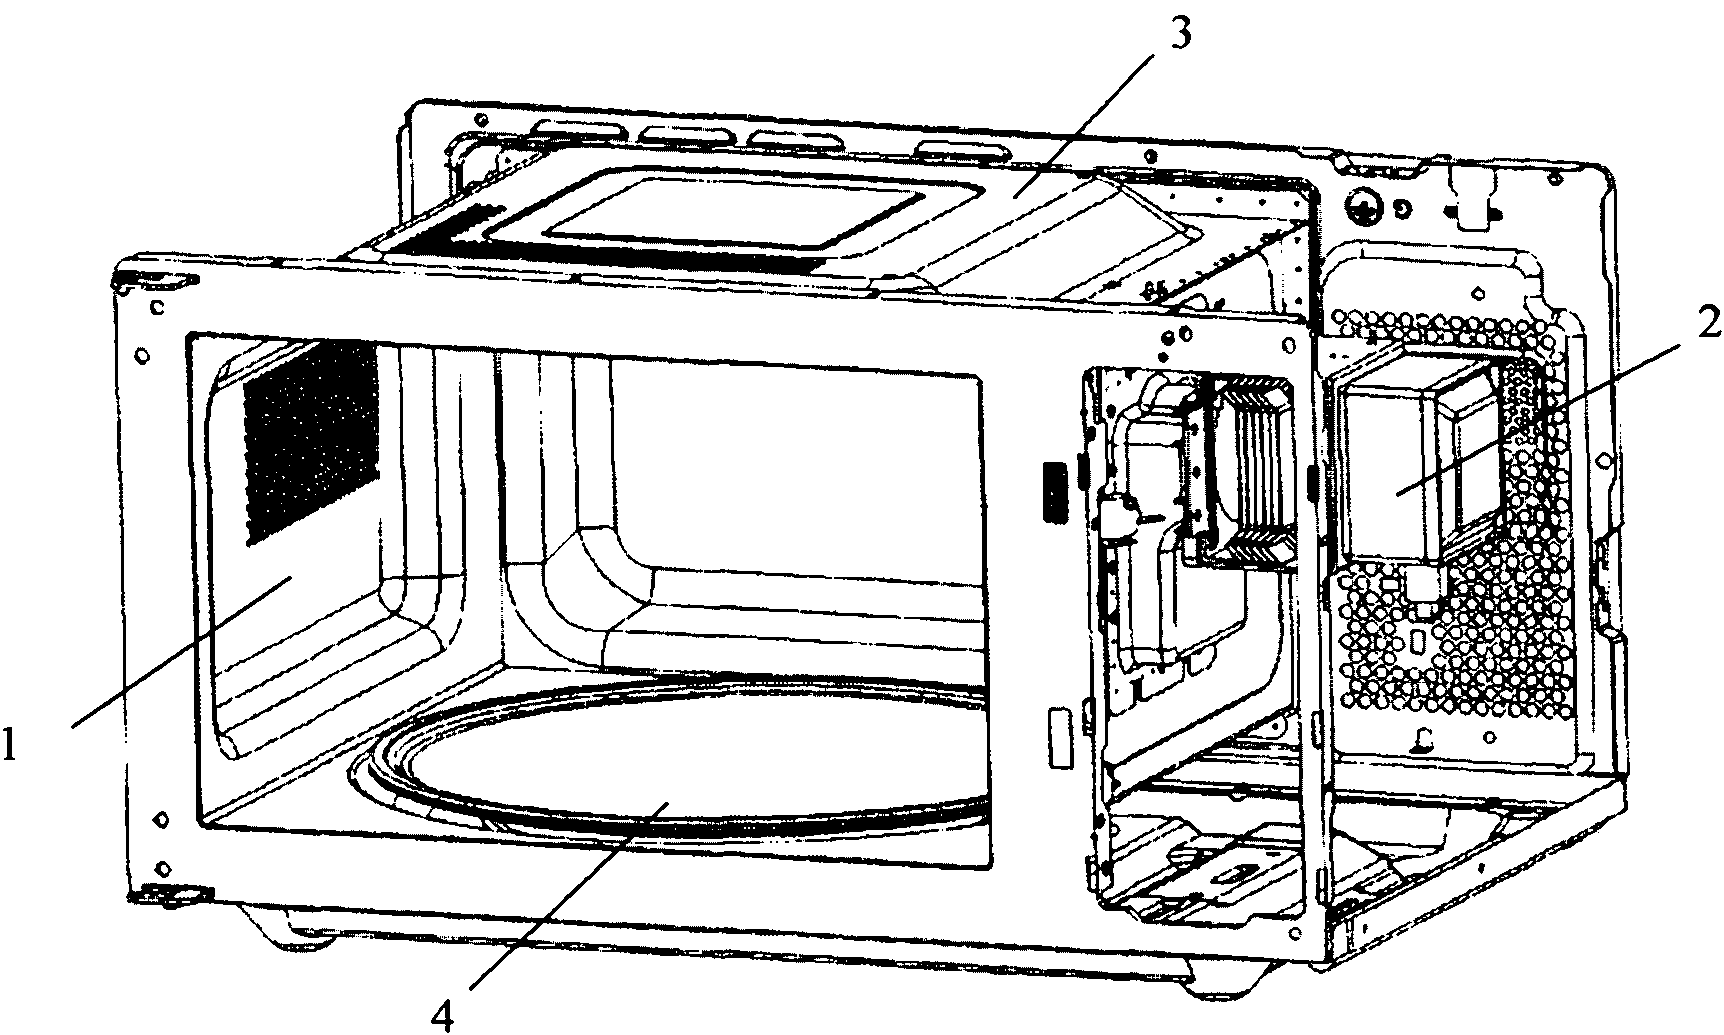 Microwave oven with novel rotating disk structure